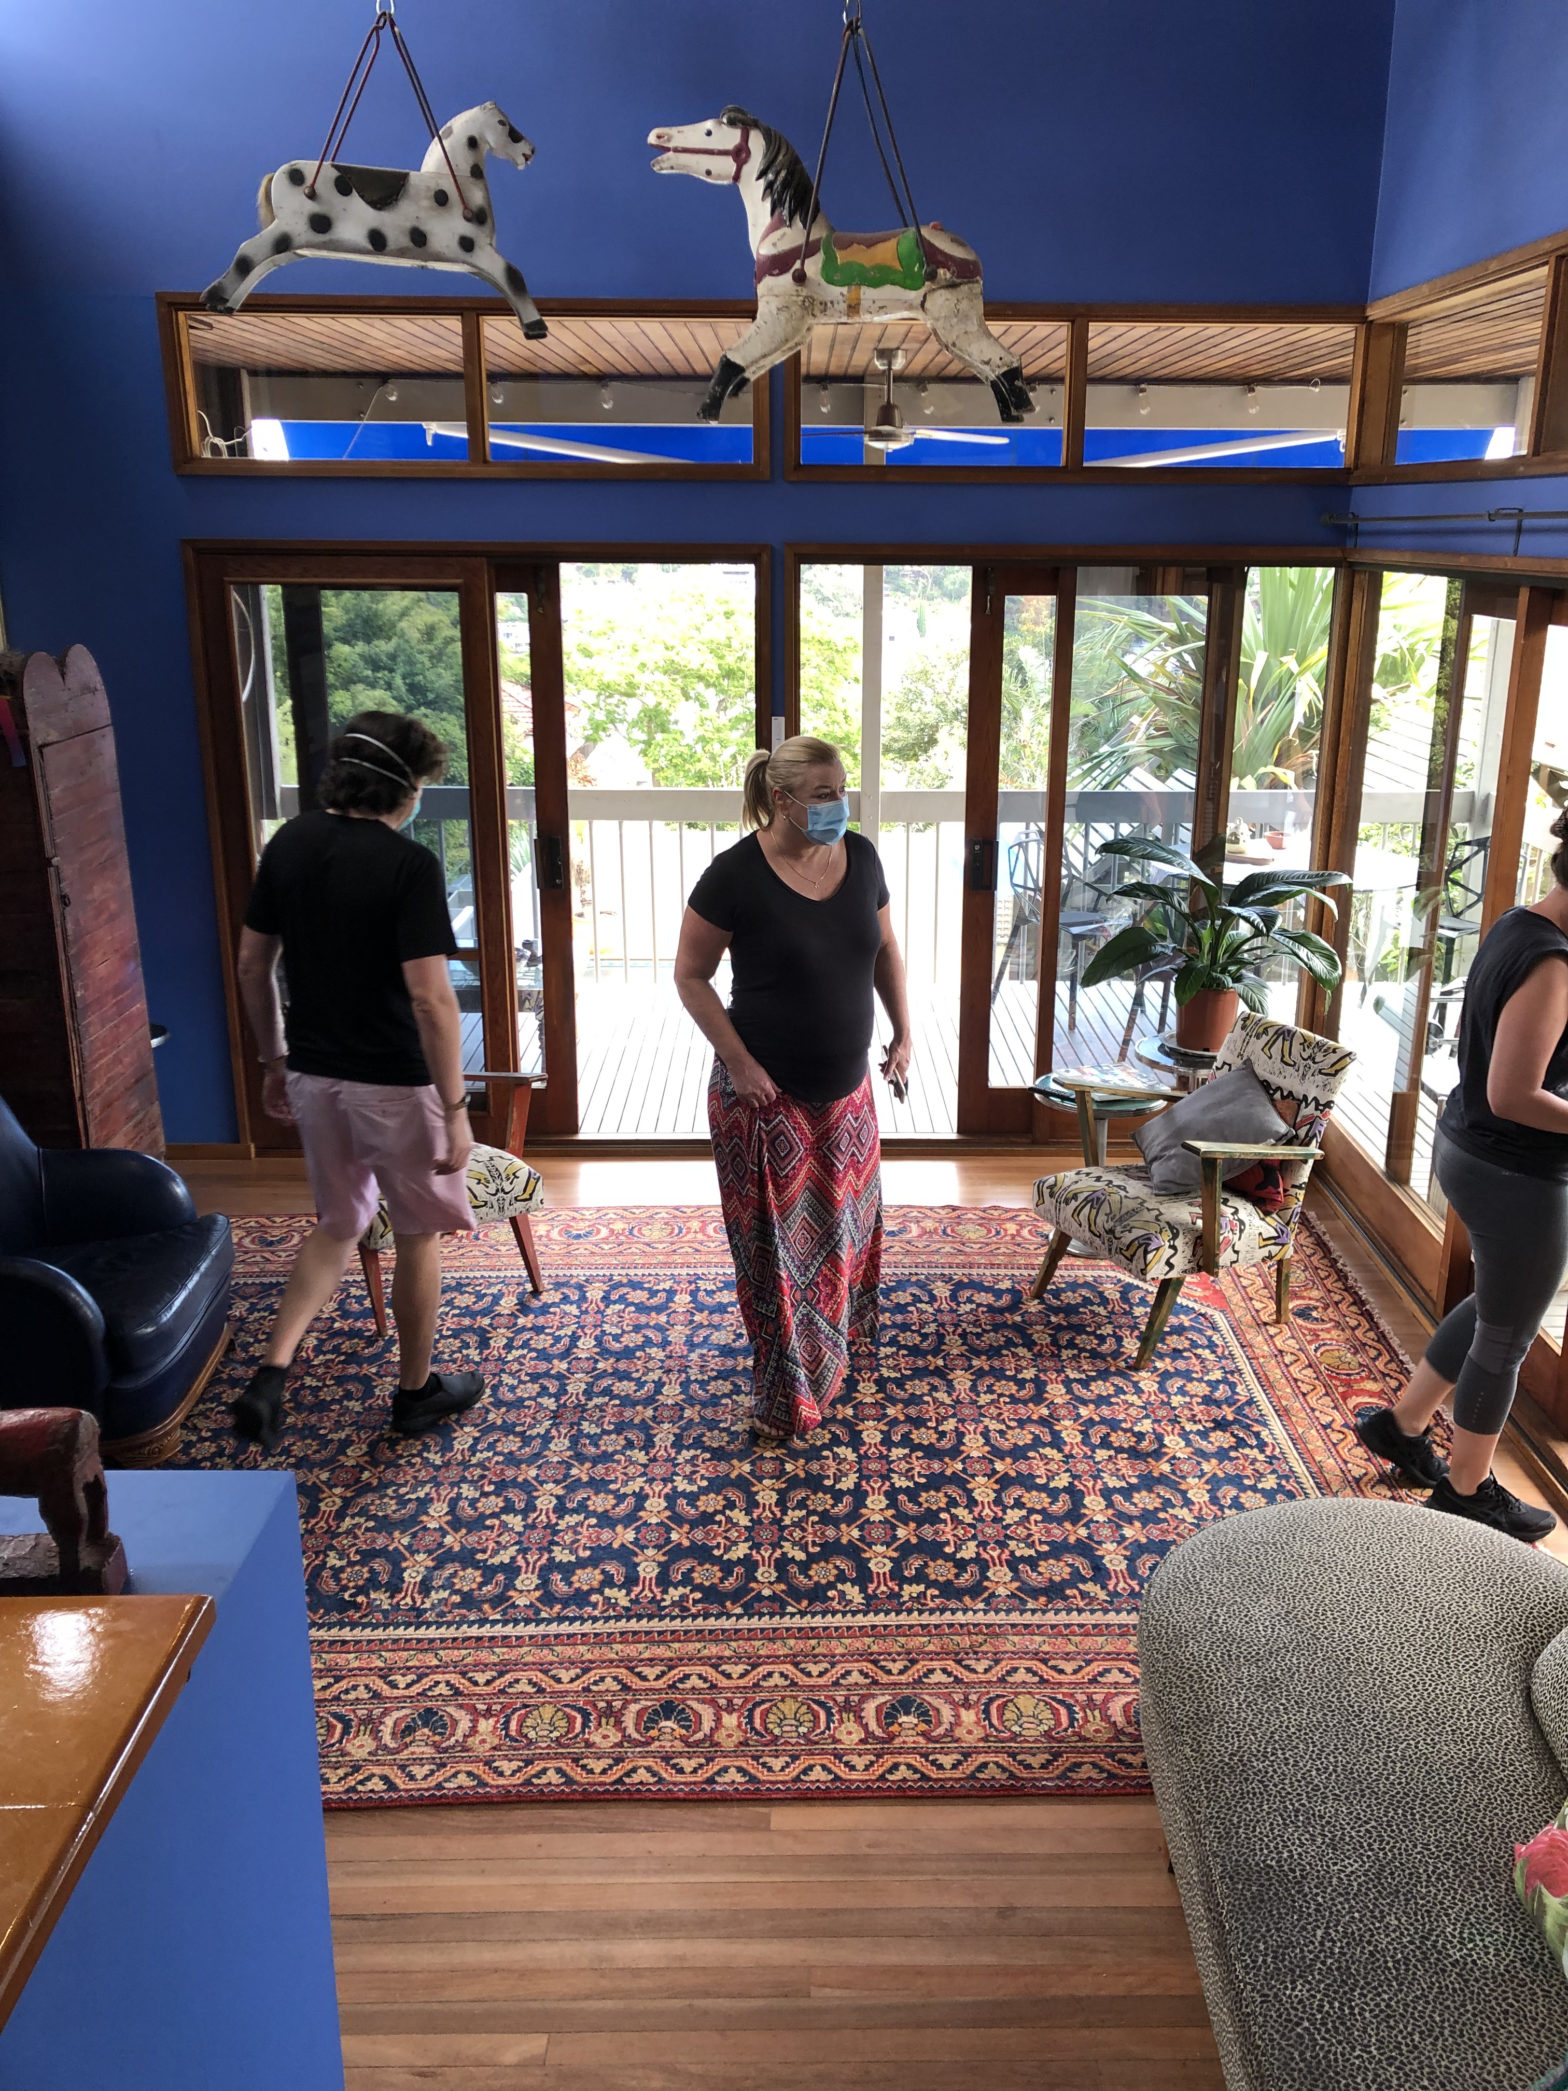 Brendan and 2 other people inside a house with dark blue walls and blue and red persian carpets